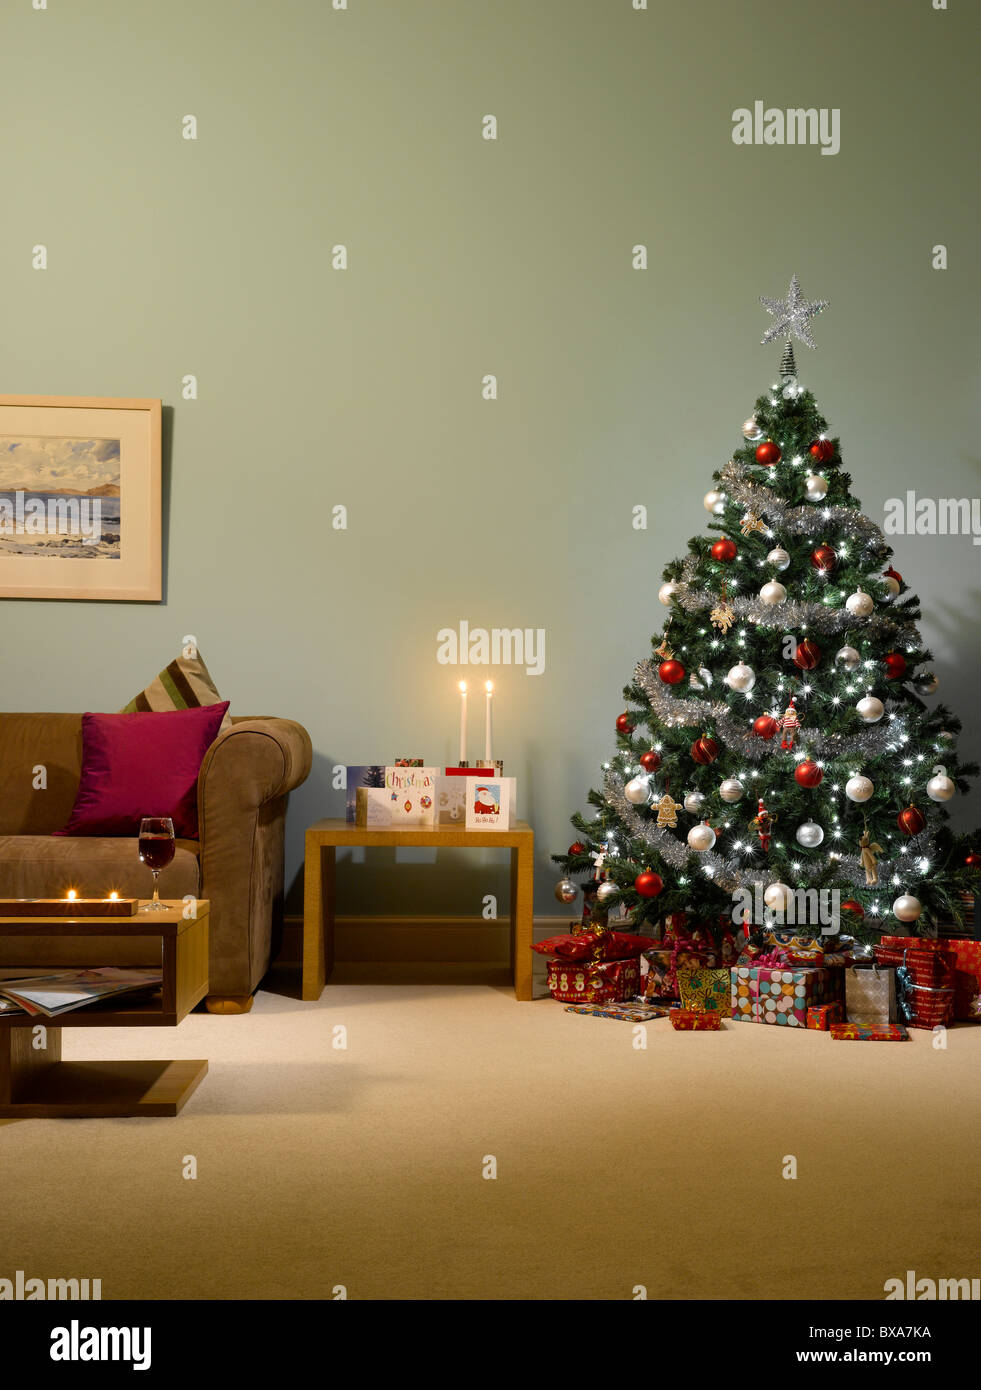 A warm homely Christmas scene in a living room Stock Photo